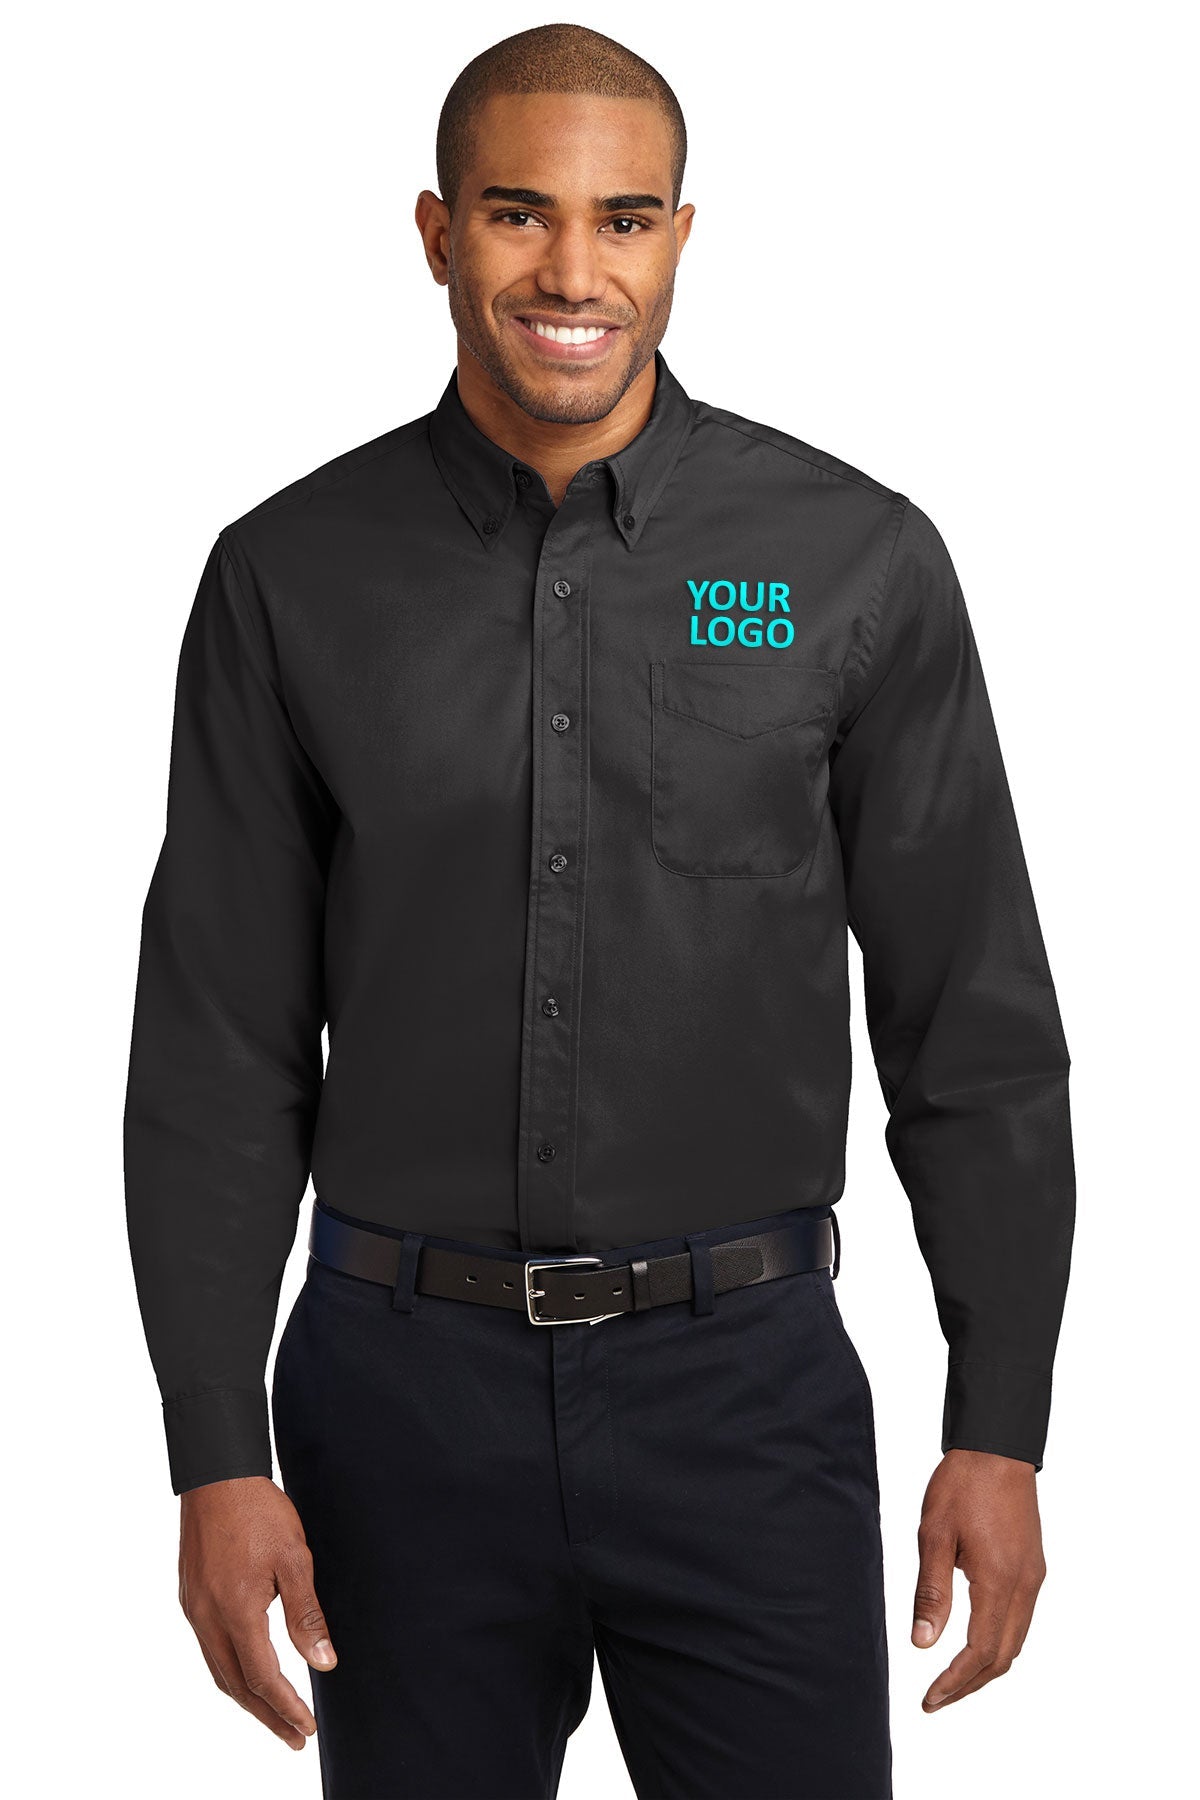 Port Authority Black/ Light Stone TLS608 order embroidered polo shirts